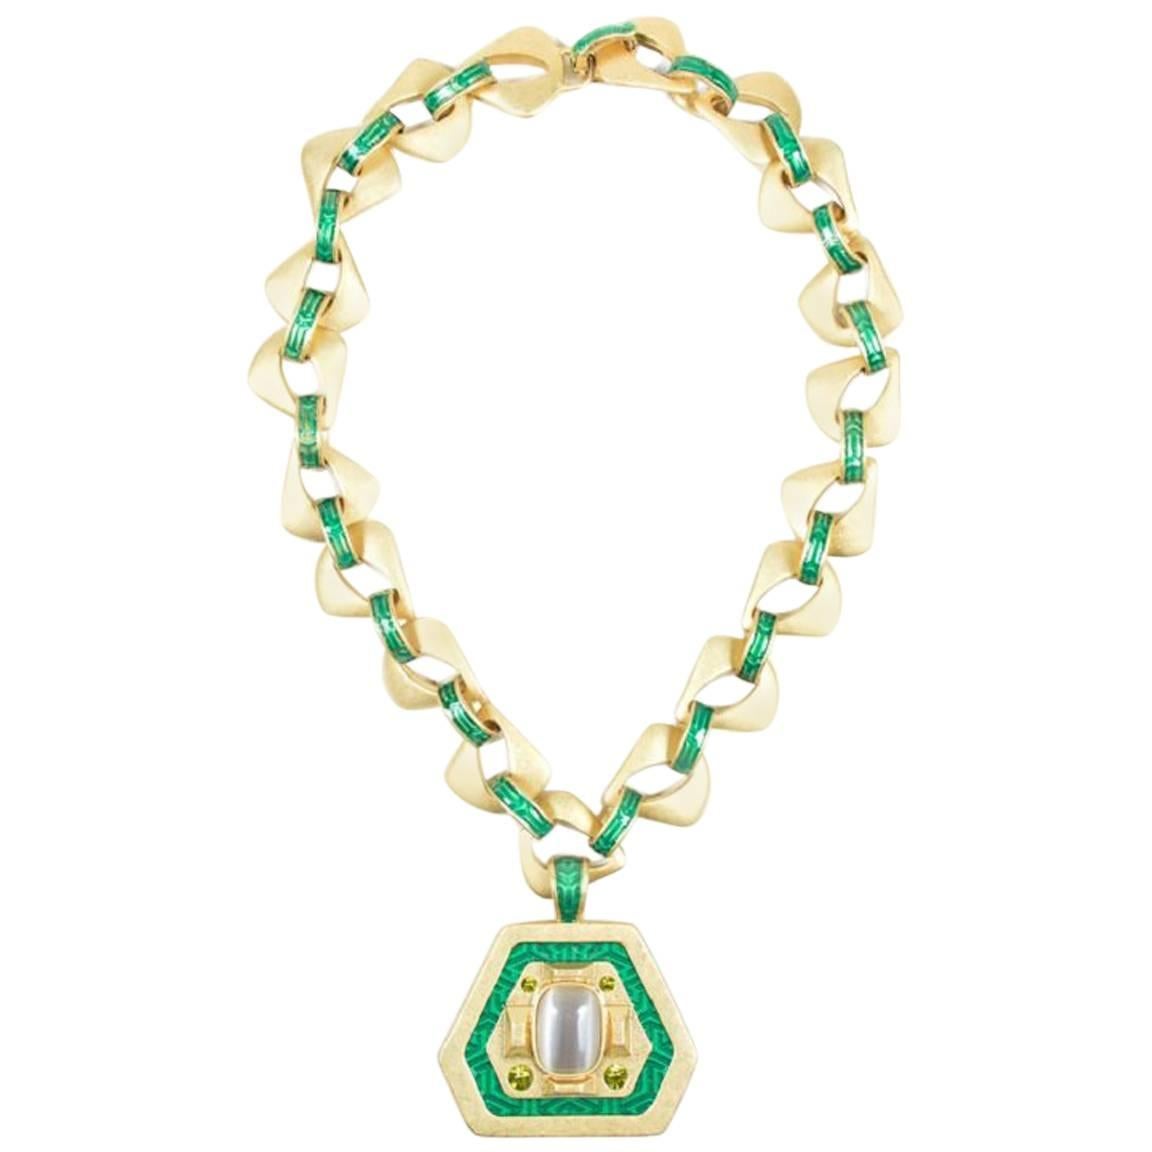 Vintage Gold Tone Green Enamel Crystal Stone Geometric Pendant Chain Necklace For Sale